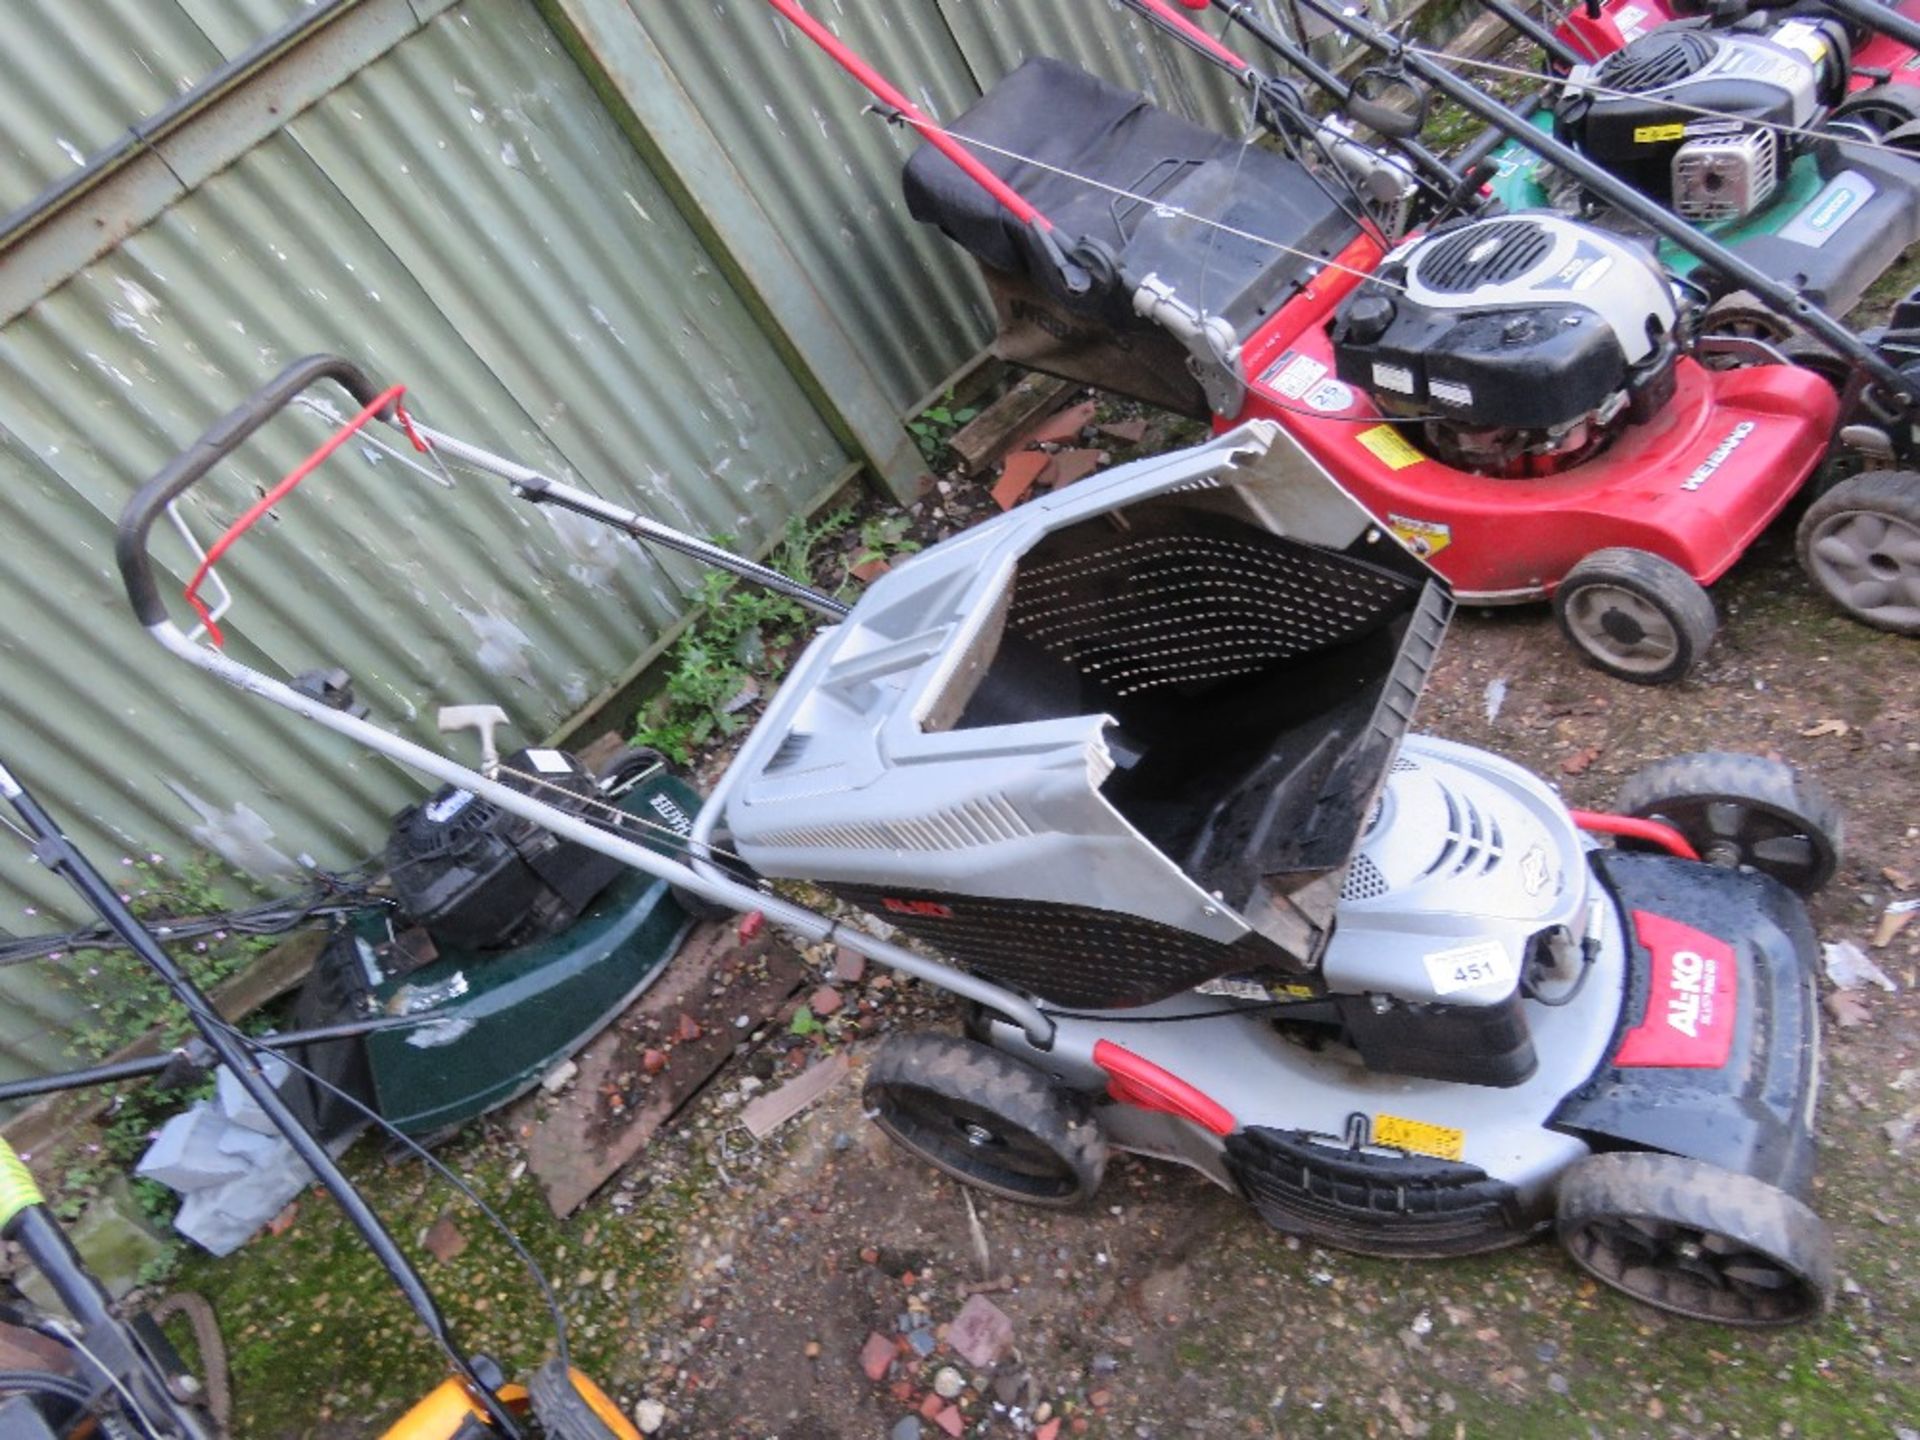 ALKO PETROL ENGINED ROTARY LAWNMOWER. WITH COLLECTOR. THIS LOT IS SOLD UNDER THE AUCTIONEERS MA